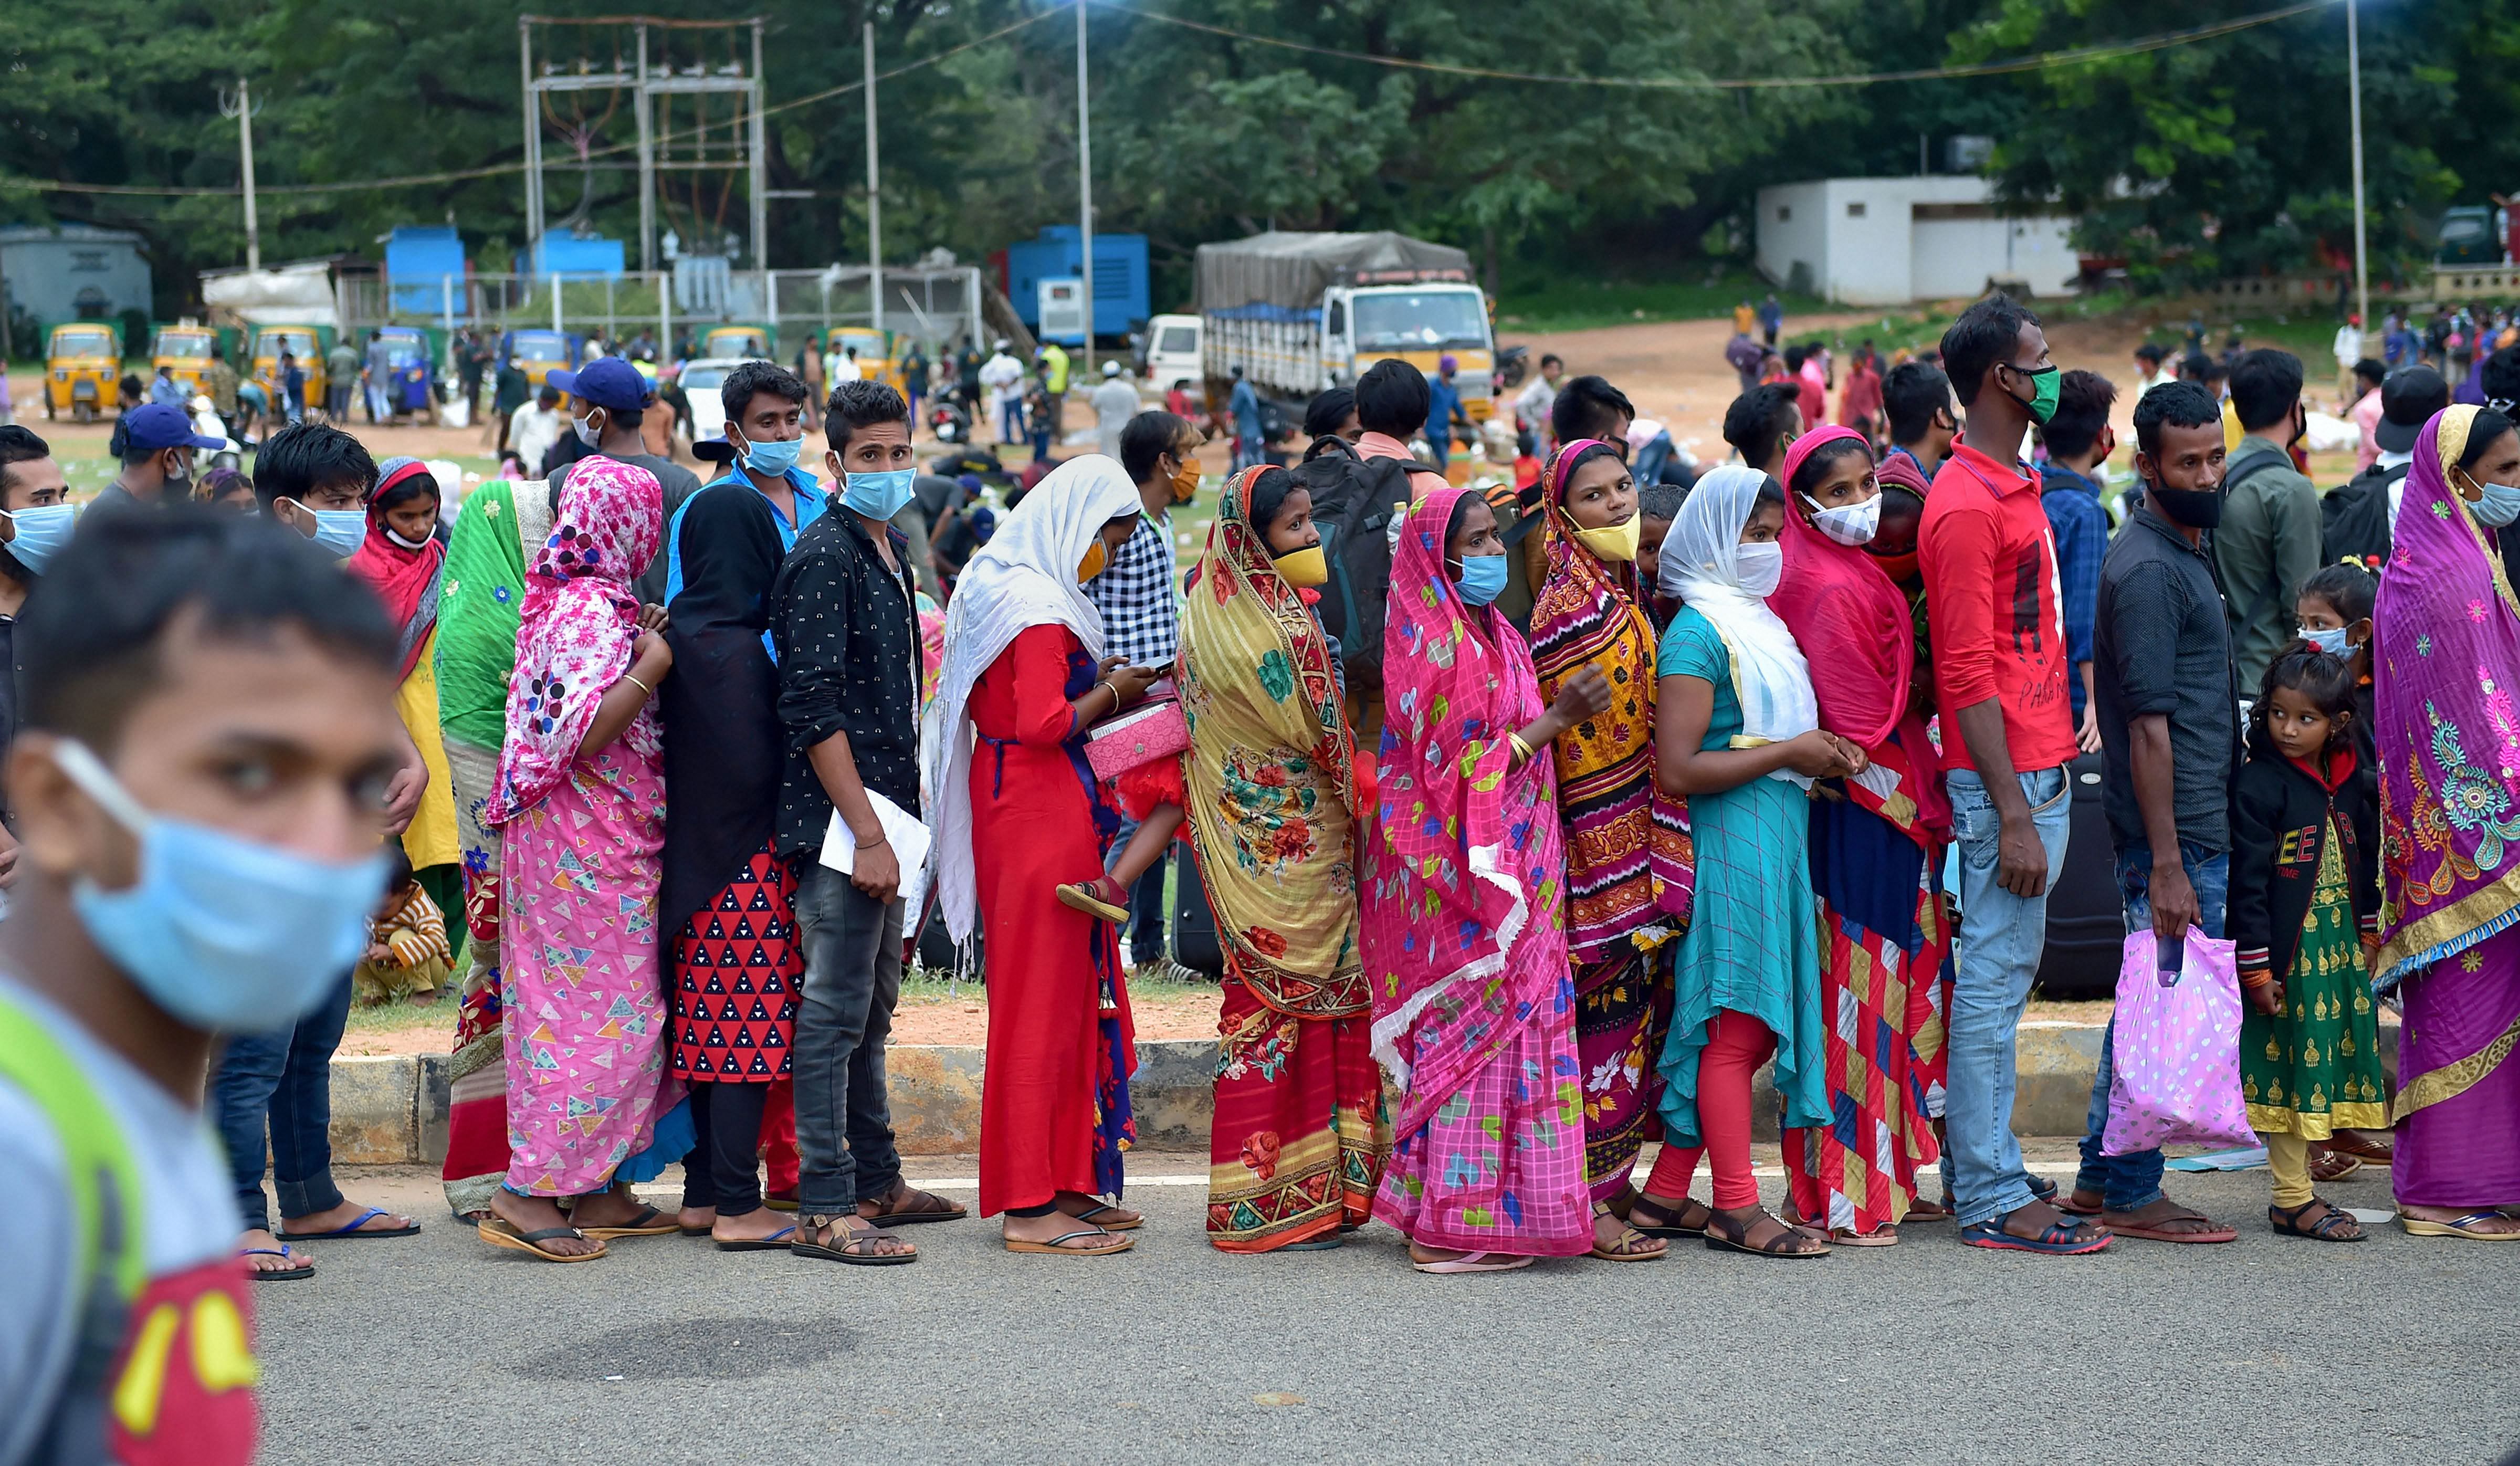 Migrants stand in queues at Palace Ground for their onward journey to their native places via 'Sharmik Special' train, during the ongoing COVID-19 nationwide lockdown, in Bengaluru. Credits: PTI Photo